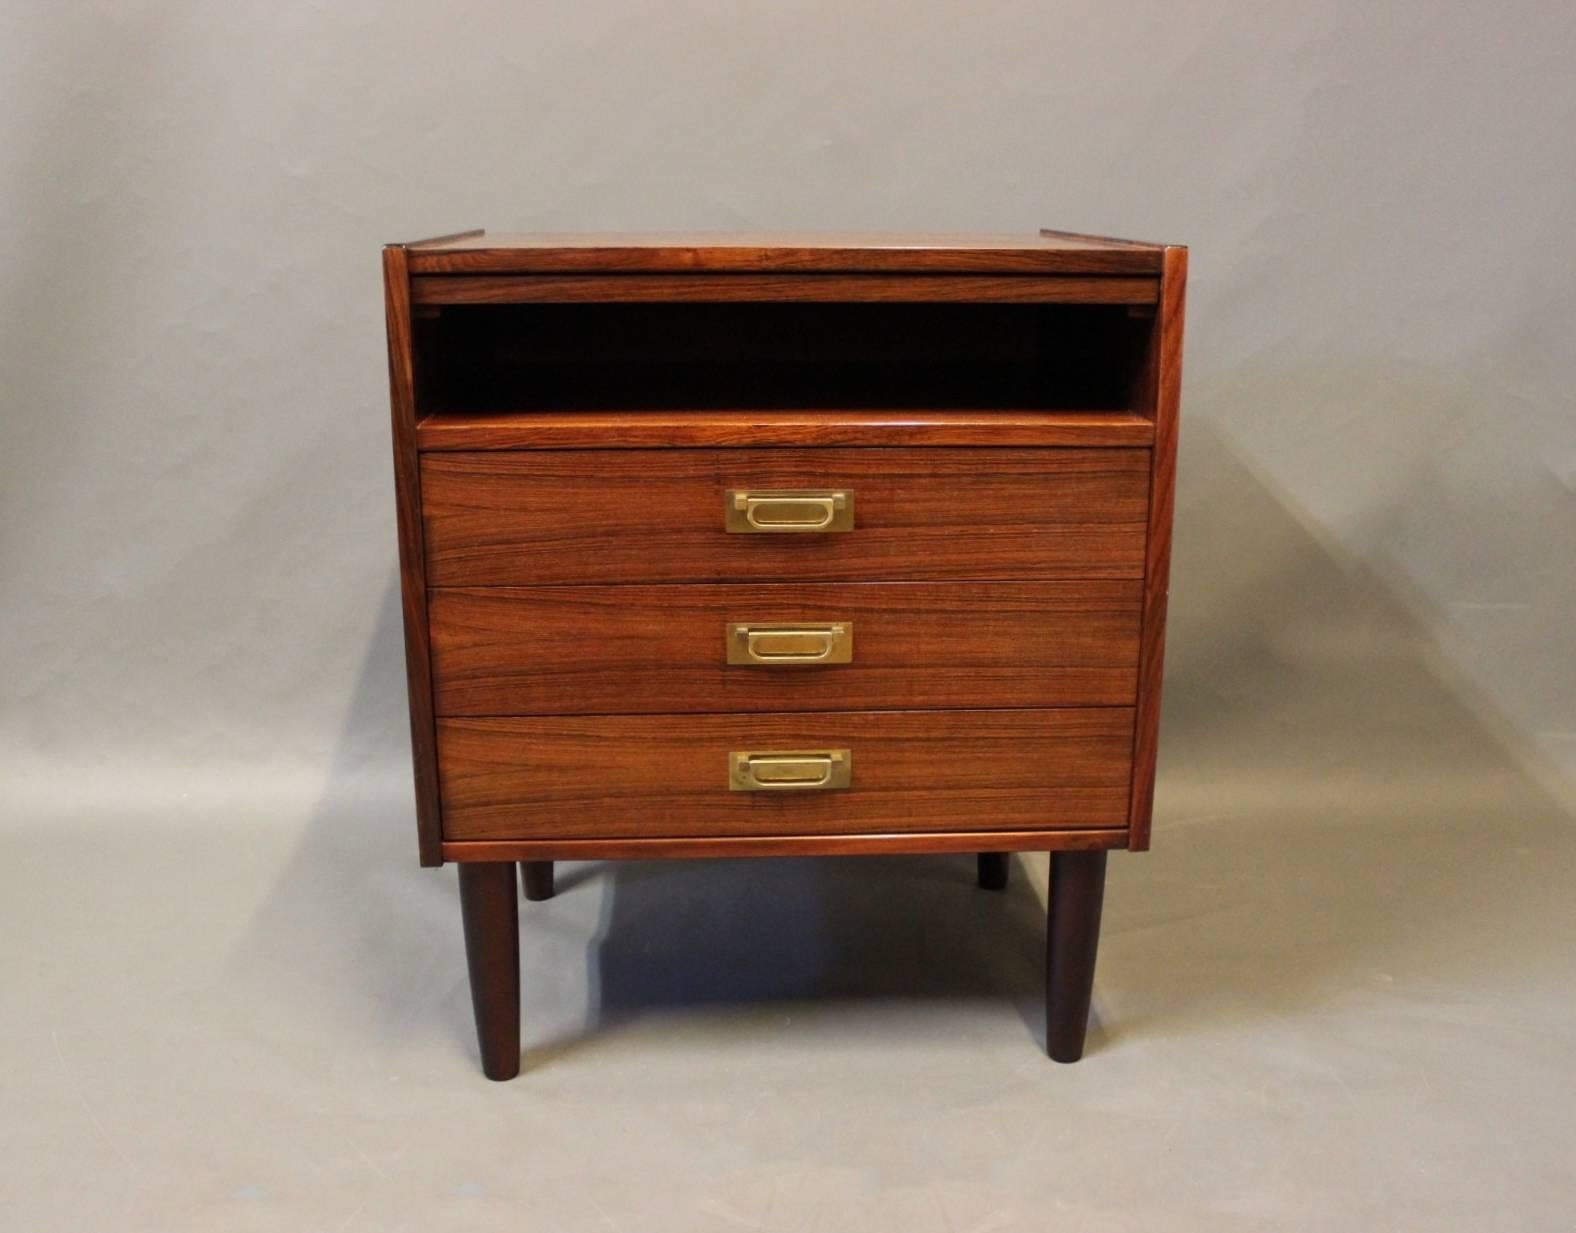 A pair of bedside tables in rosewood manufactured by Sannemanns Møbelfabrik in the 1960s. The tables are in great vintage condition and of Danish design.